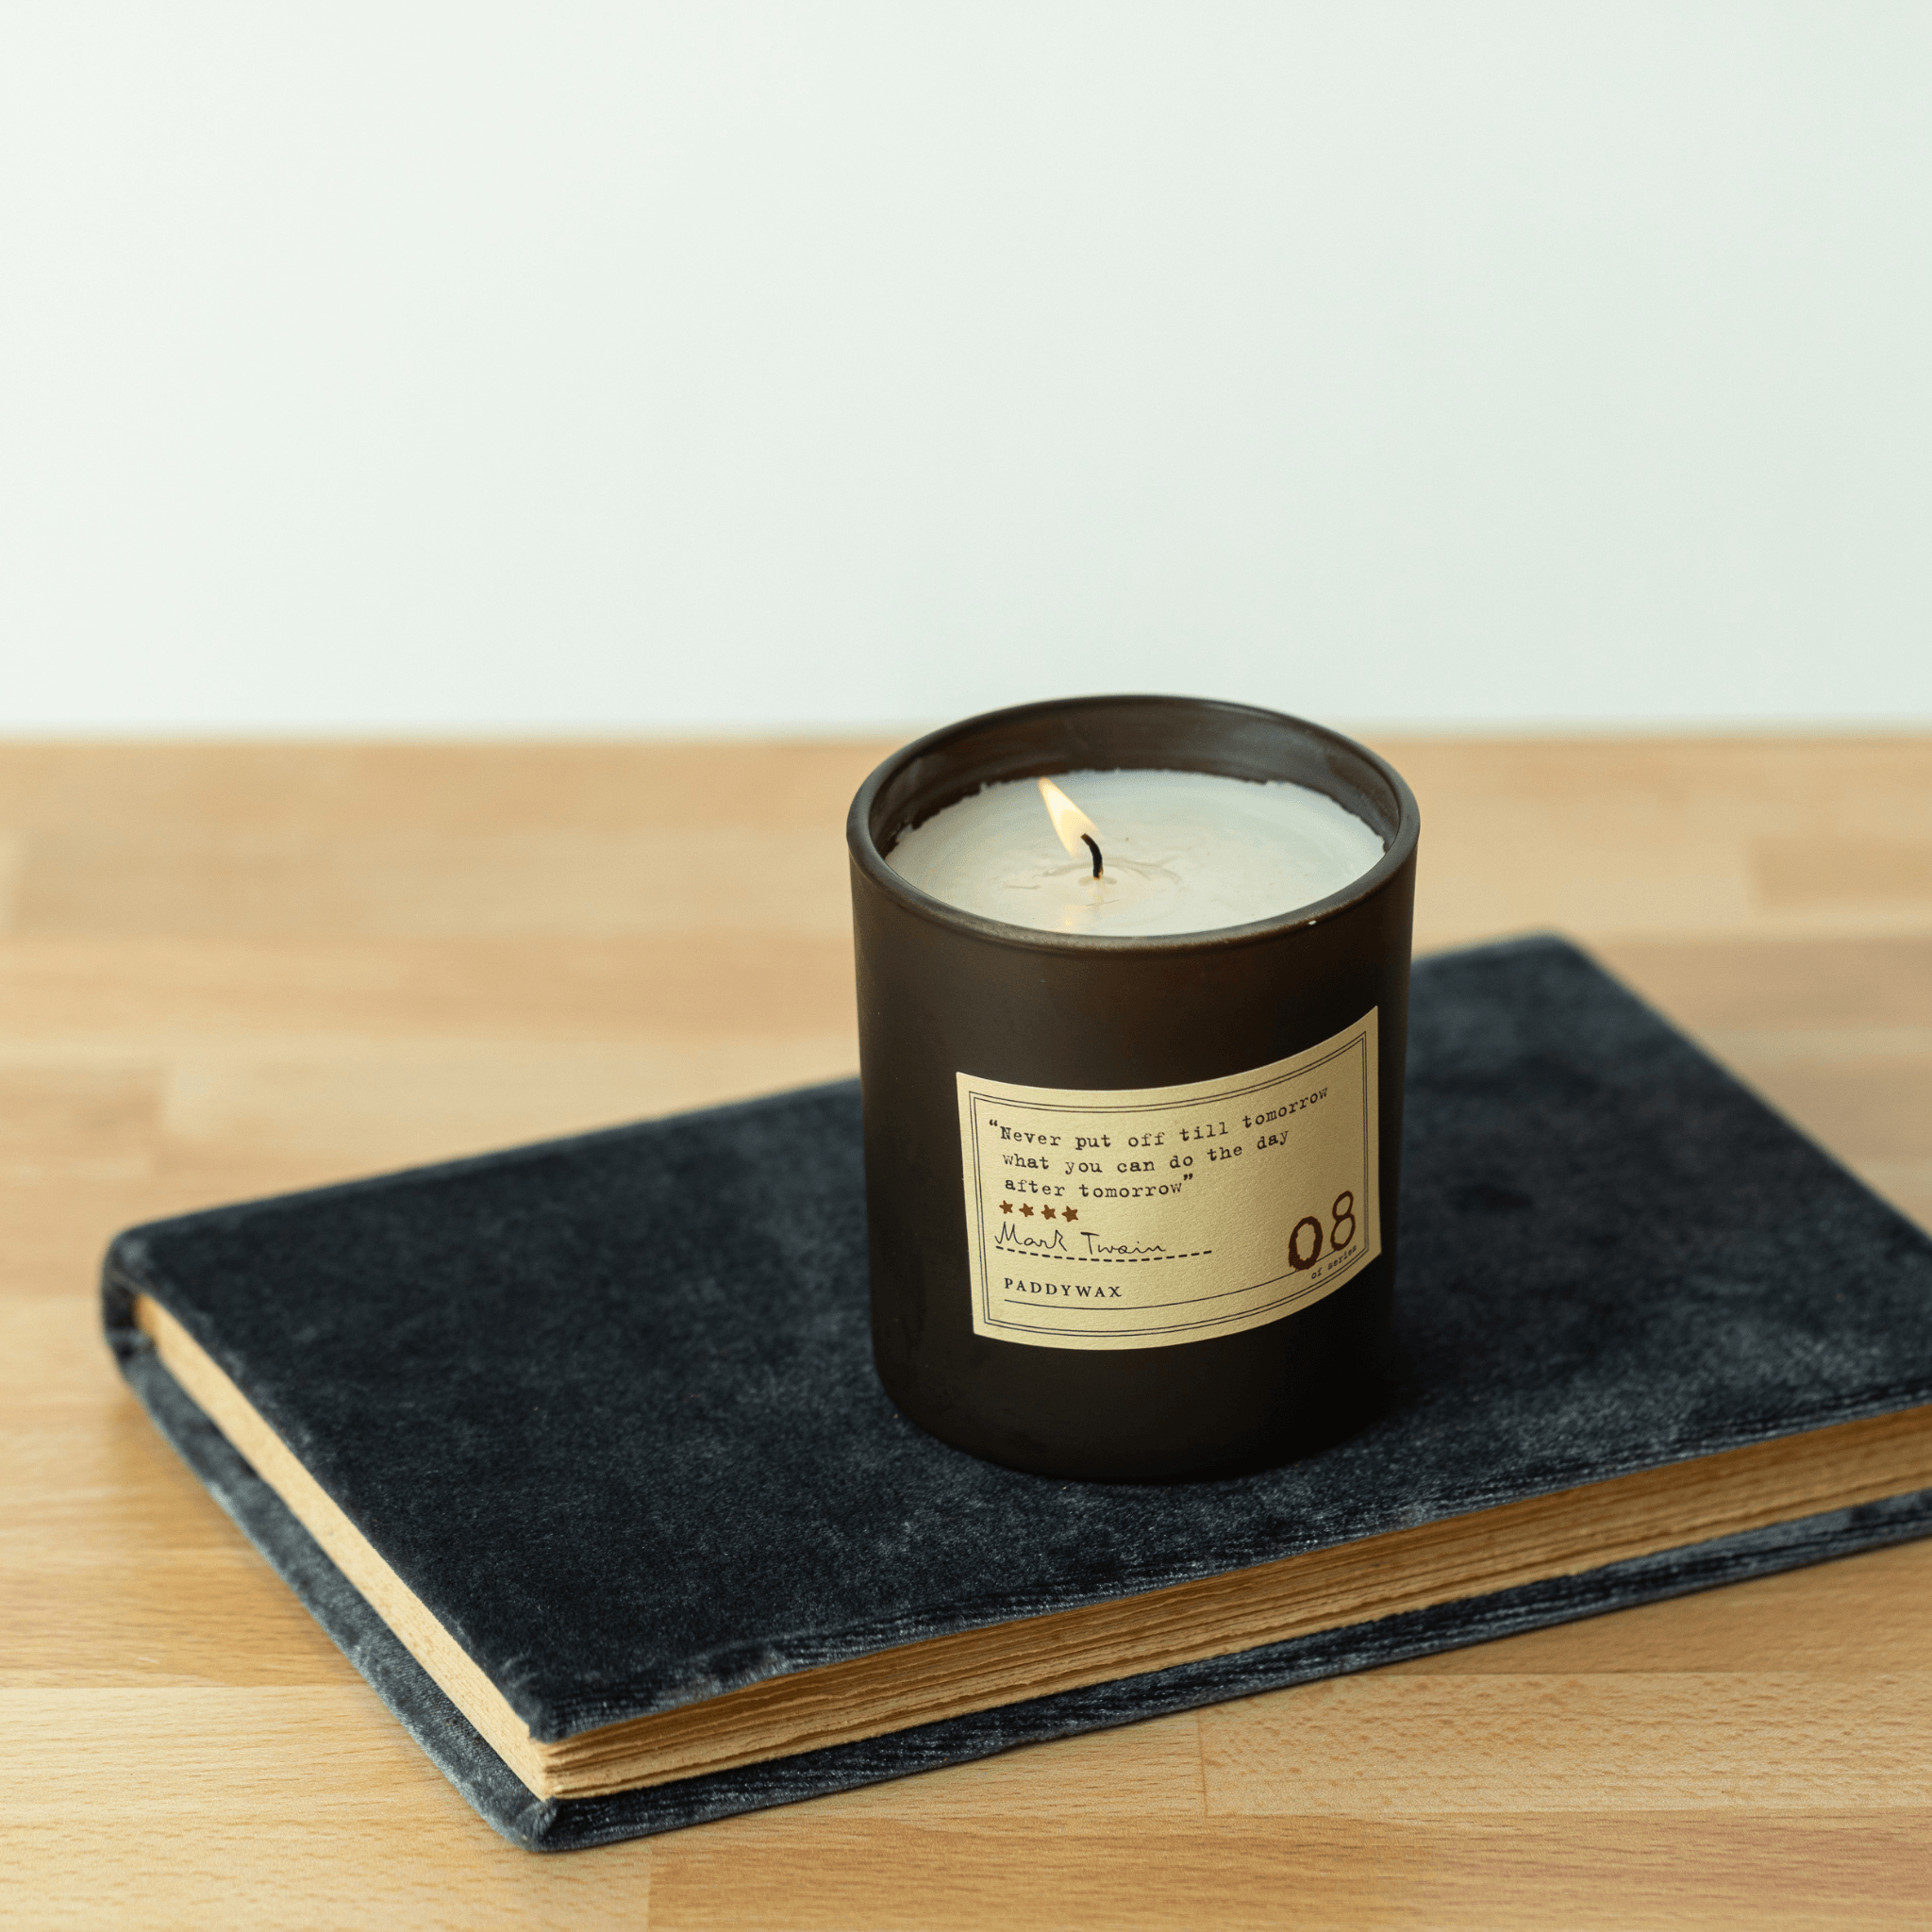 I'm addicted to Tobacco and patchouli by Paddywax. Luxury isn't about the  price tag. : r/luxurycandles